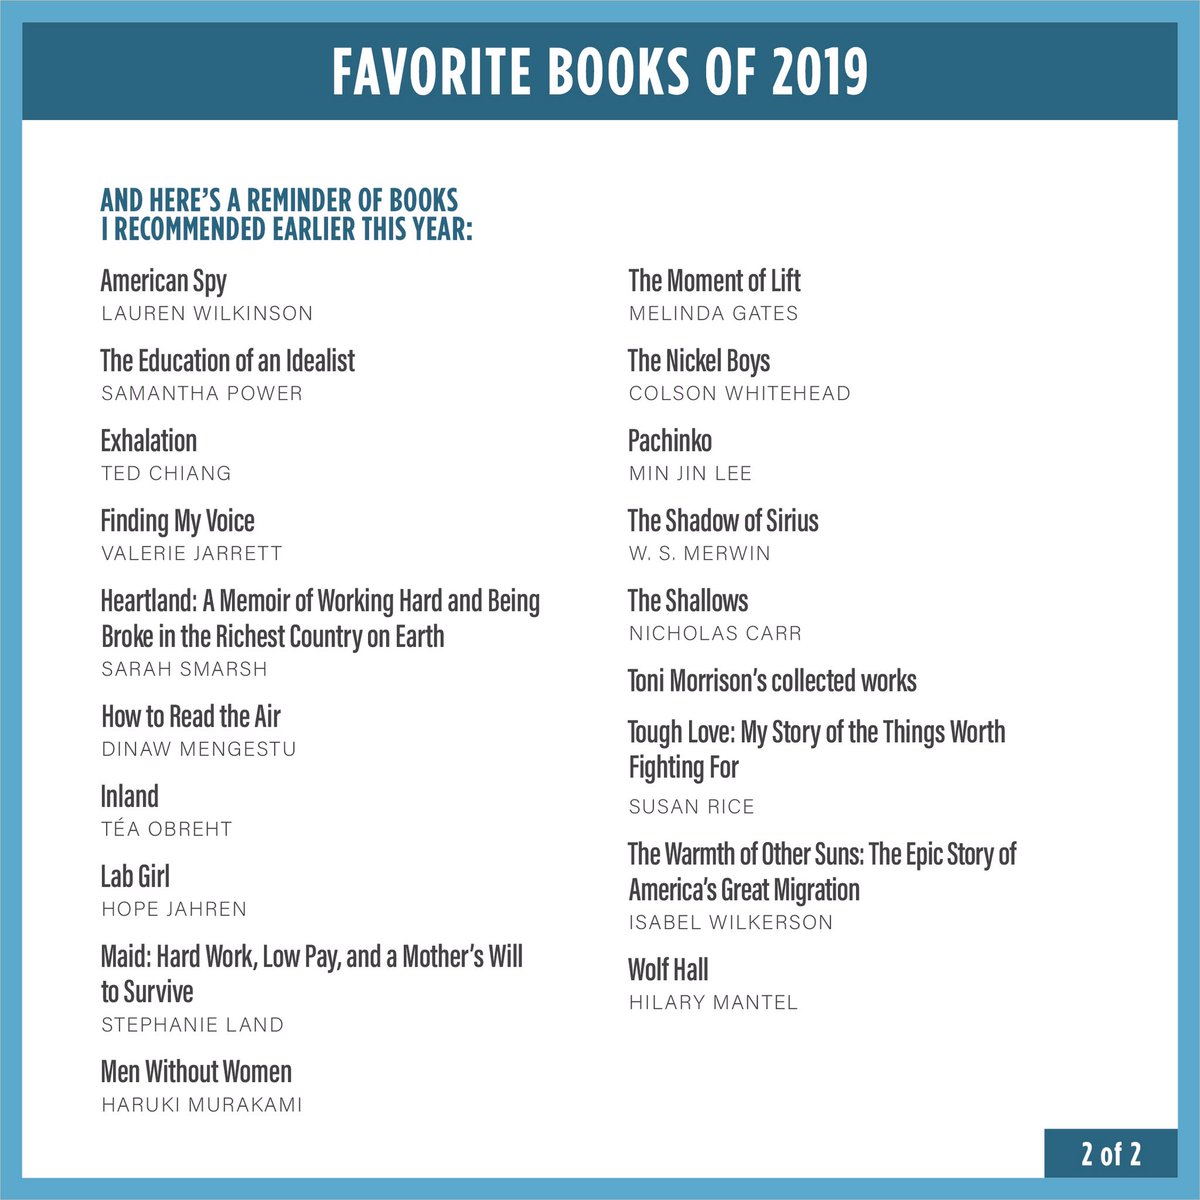 As we wind down 2019, I wanted to share with you my annual list of favorites that made the last year a little brighter. We’ll start with books today — movies and music coming soon. I hope you enjoy these as much as I did.